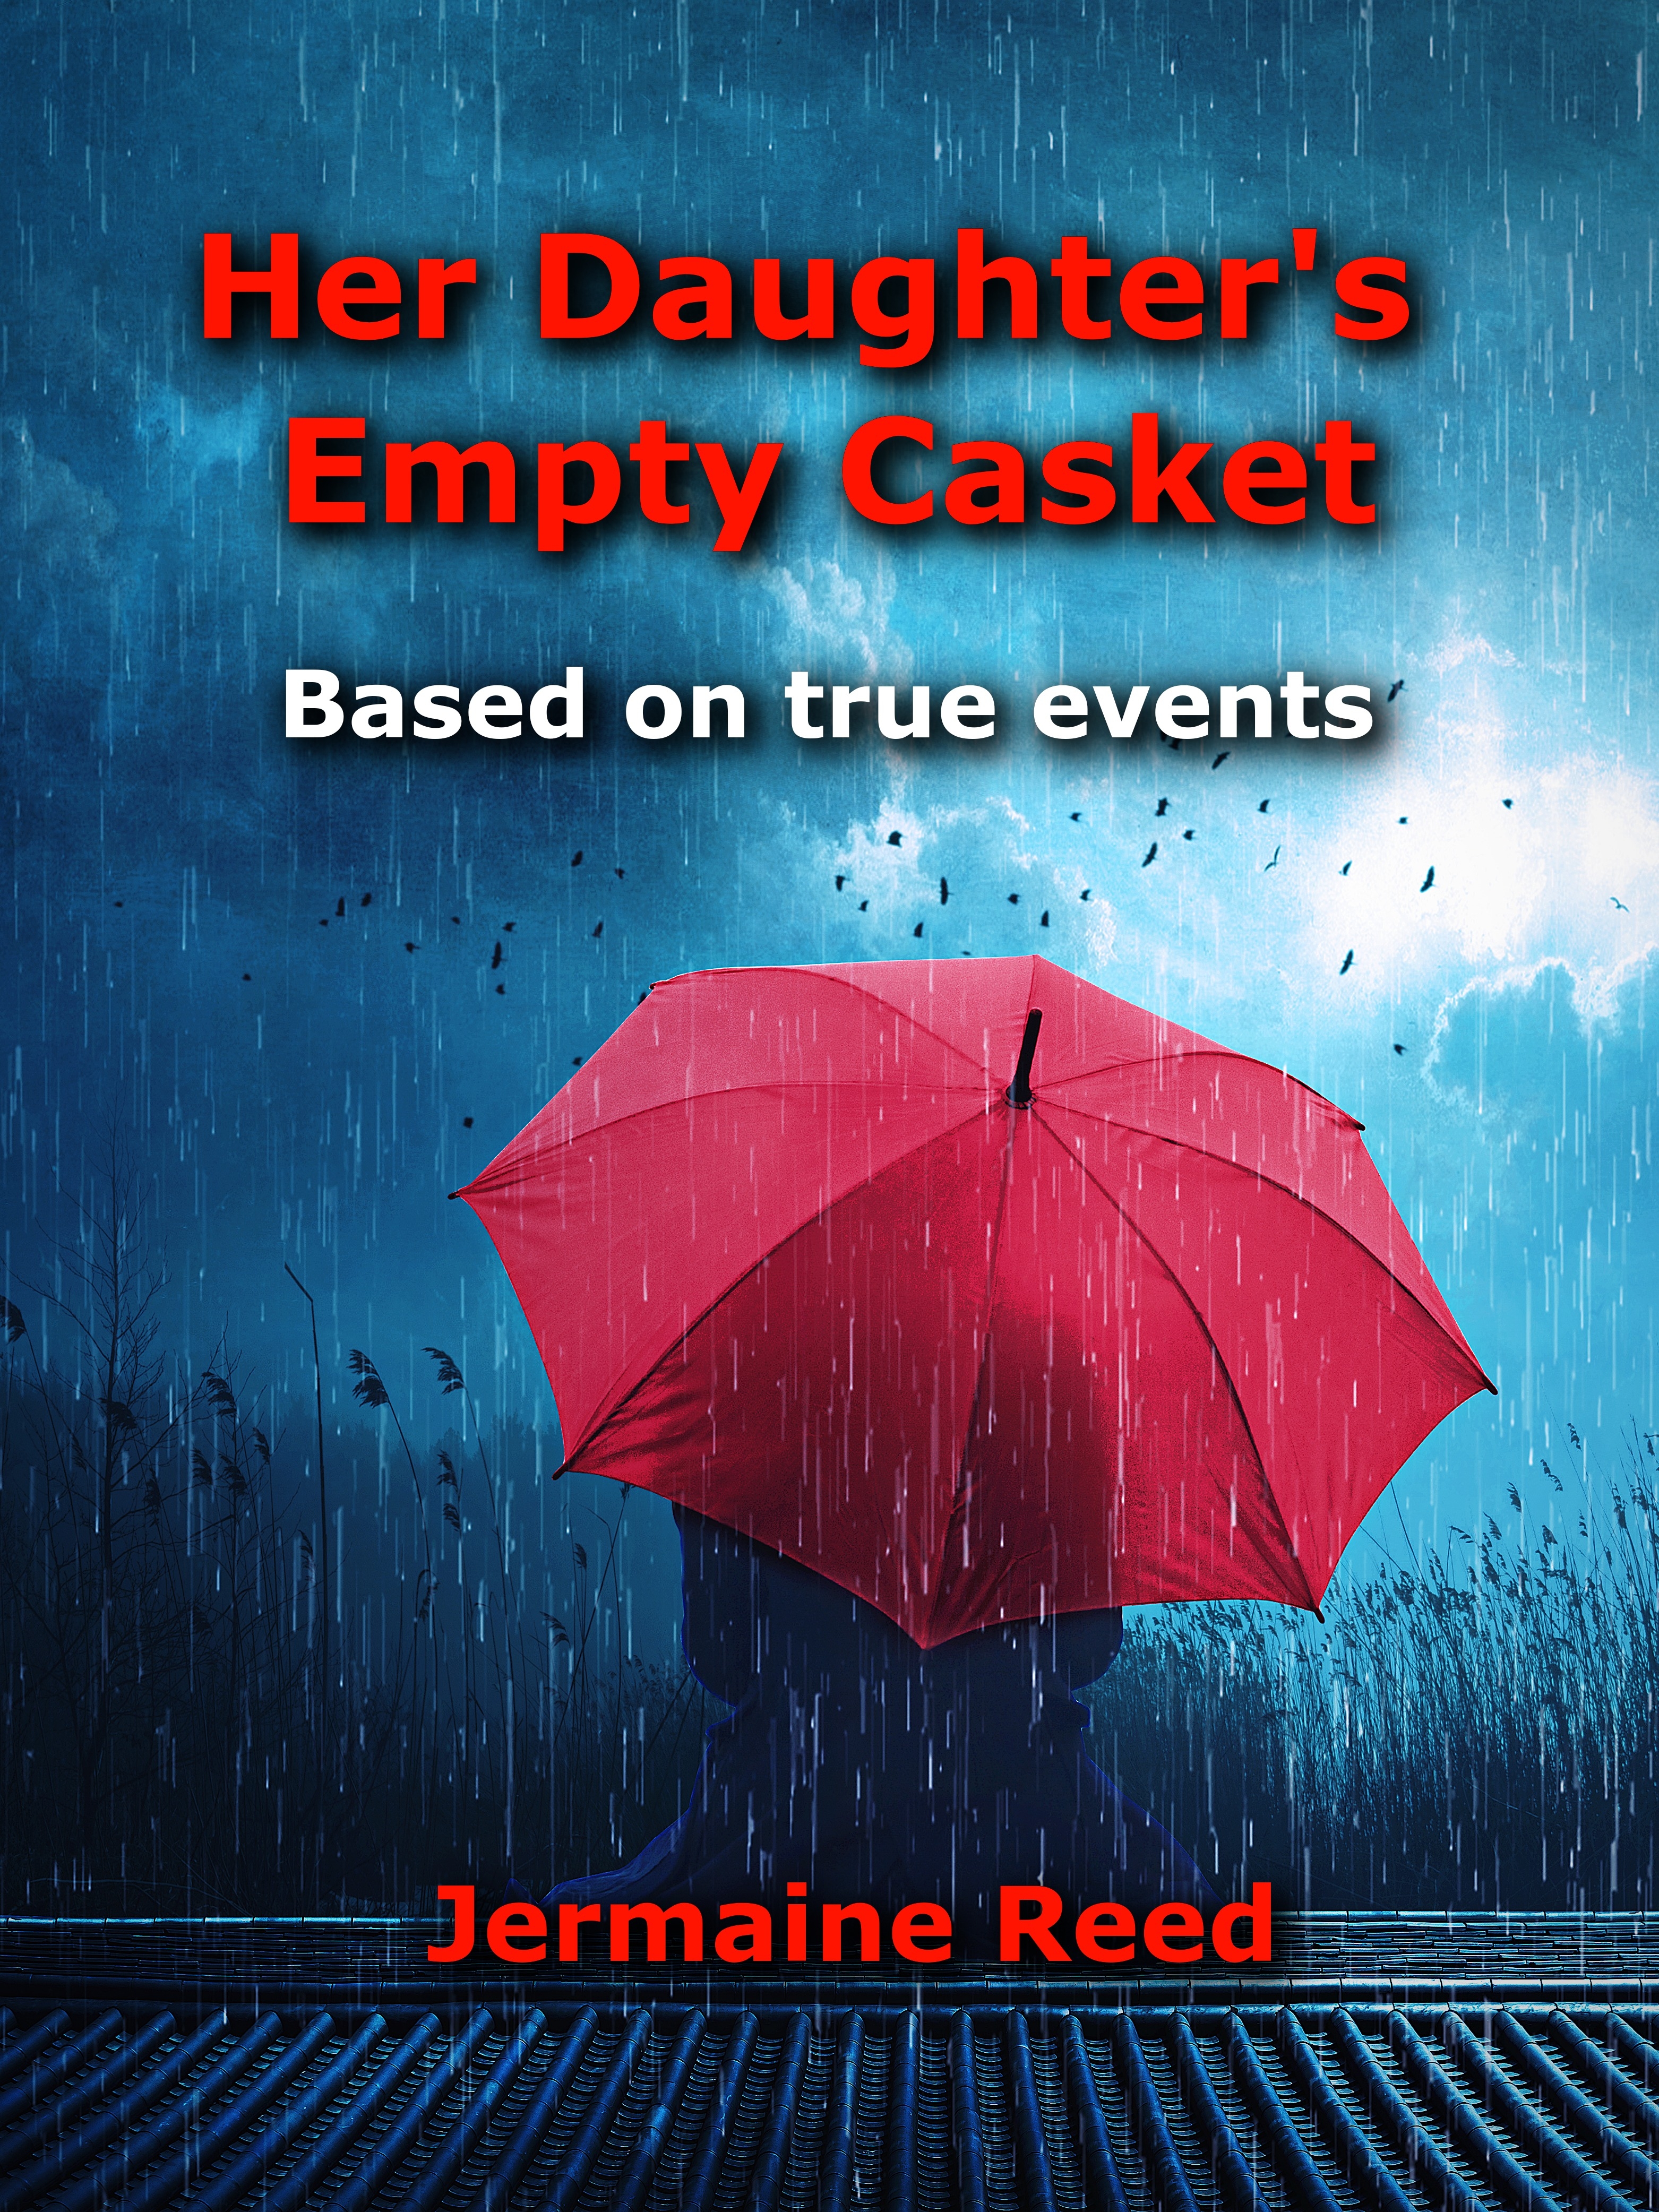 FREE: Her Daughter’s Empty Casket by Jermaine Reed